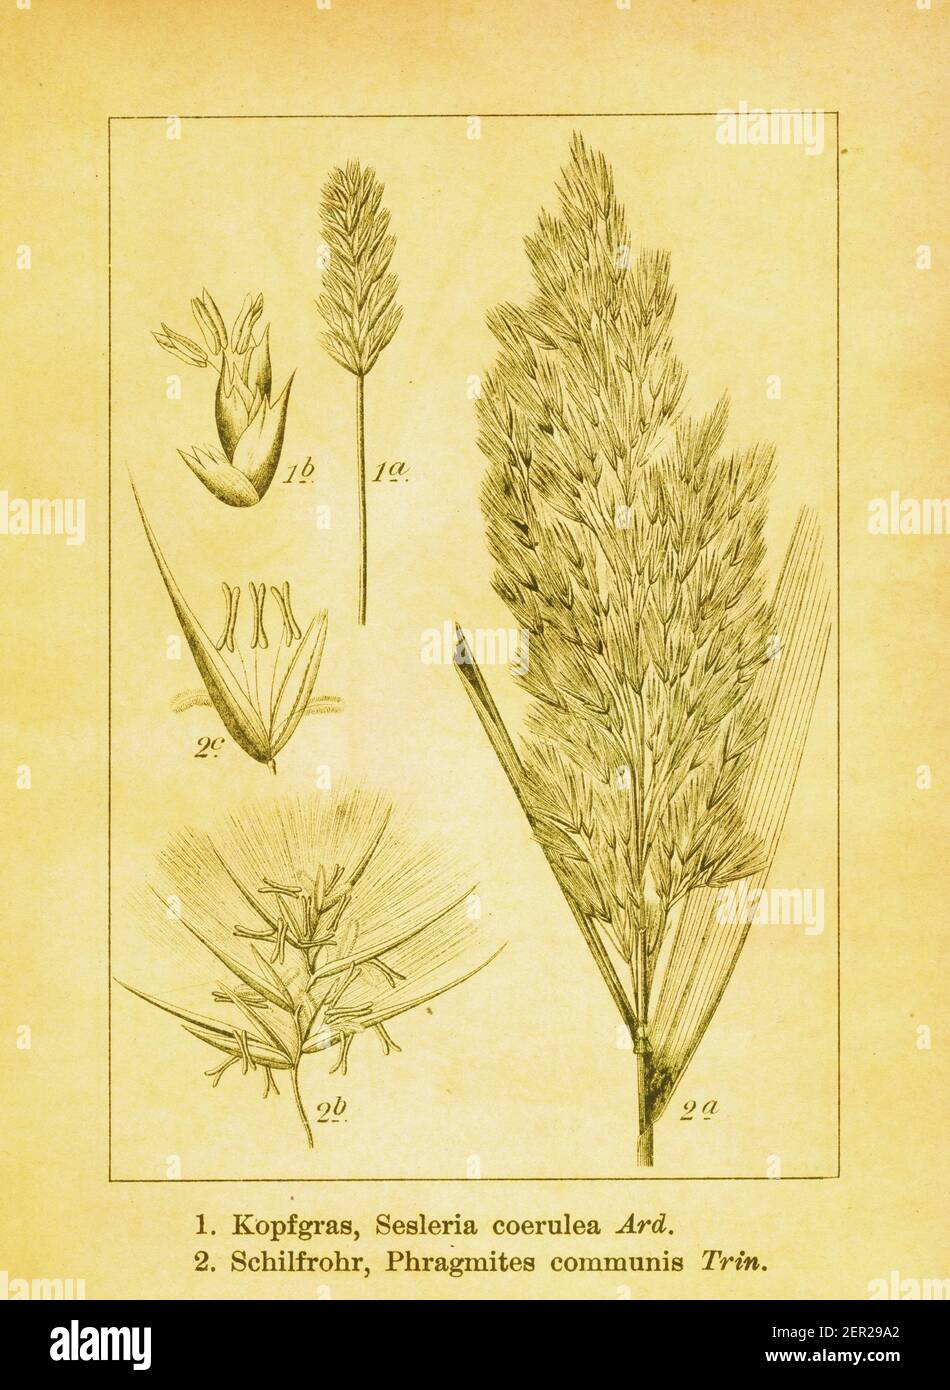 19th-century illustration of blue moor grass and common reed. Engraving by Jacob Sturm (1771-1848) from the book Deutschlands Flora in Abbildungen nac Stock Photo